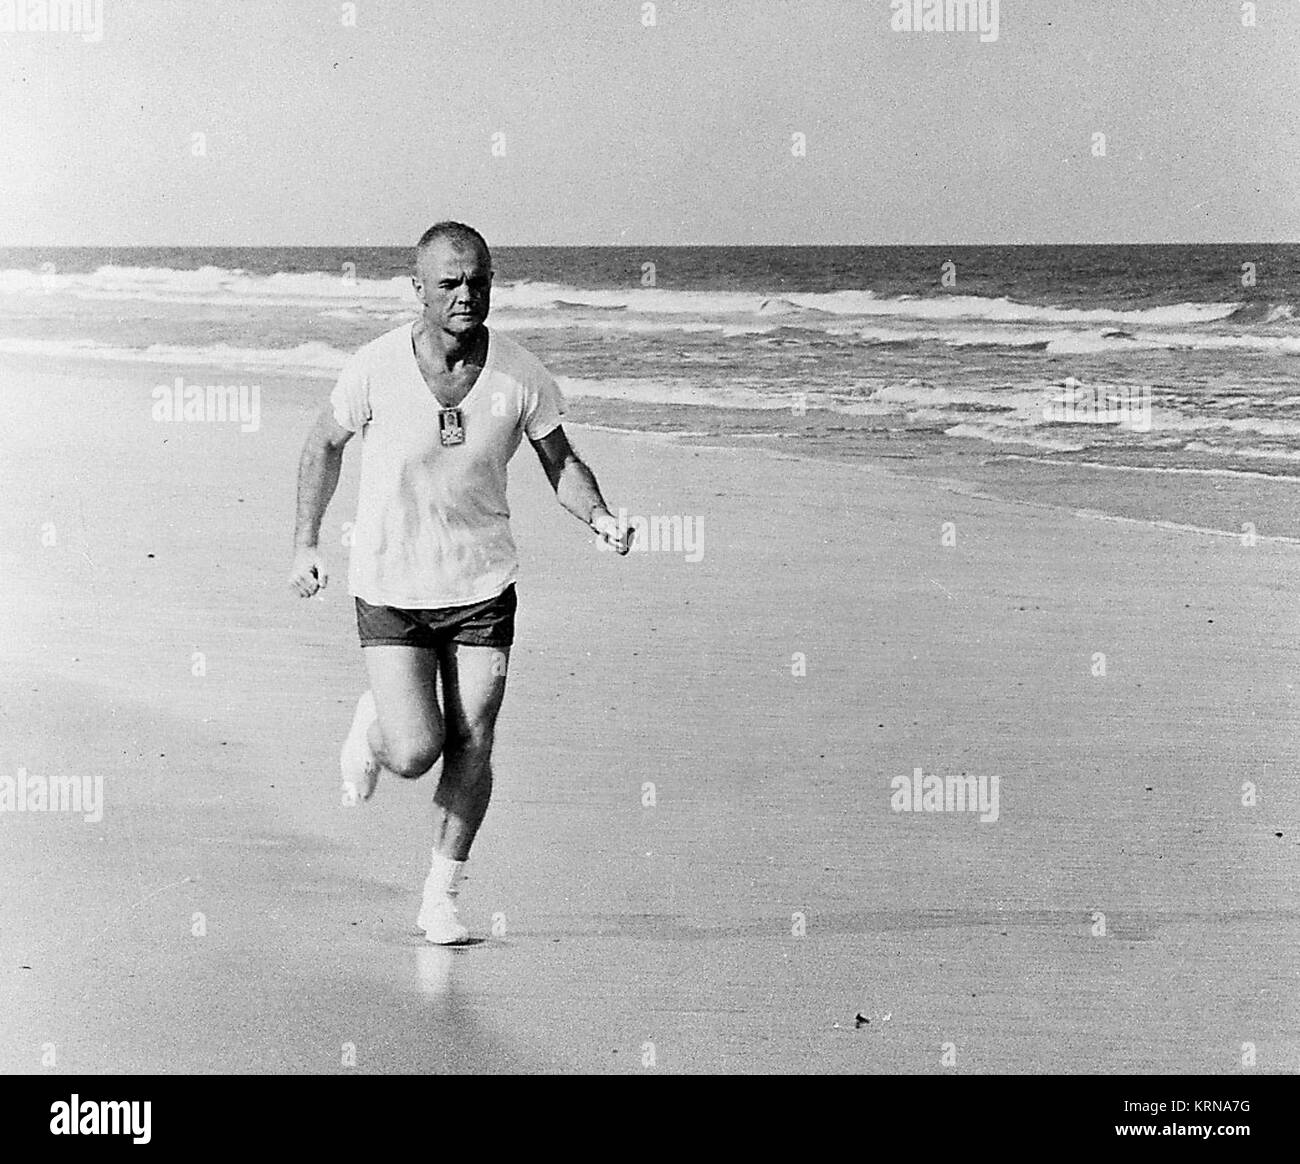 1962 -- Running along the beach at Cape Canaveral, Florida, astronaut John H. Glenn Jr., pilot of the Mercury-Atlas 6 mission, participates in a strict physical training program, as he exemplifies by frequent running.  Photo credit: NASA KSC-JohnGlenn-0005 (31144829360) Stock Photo